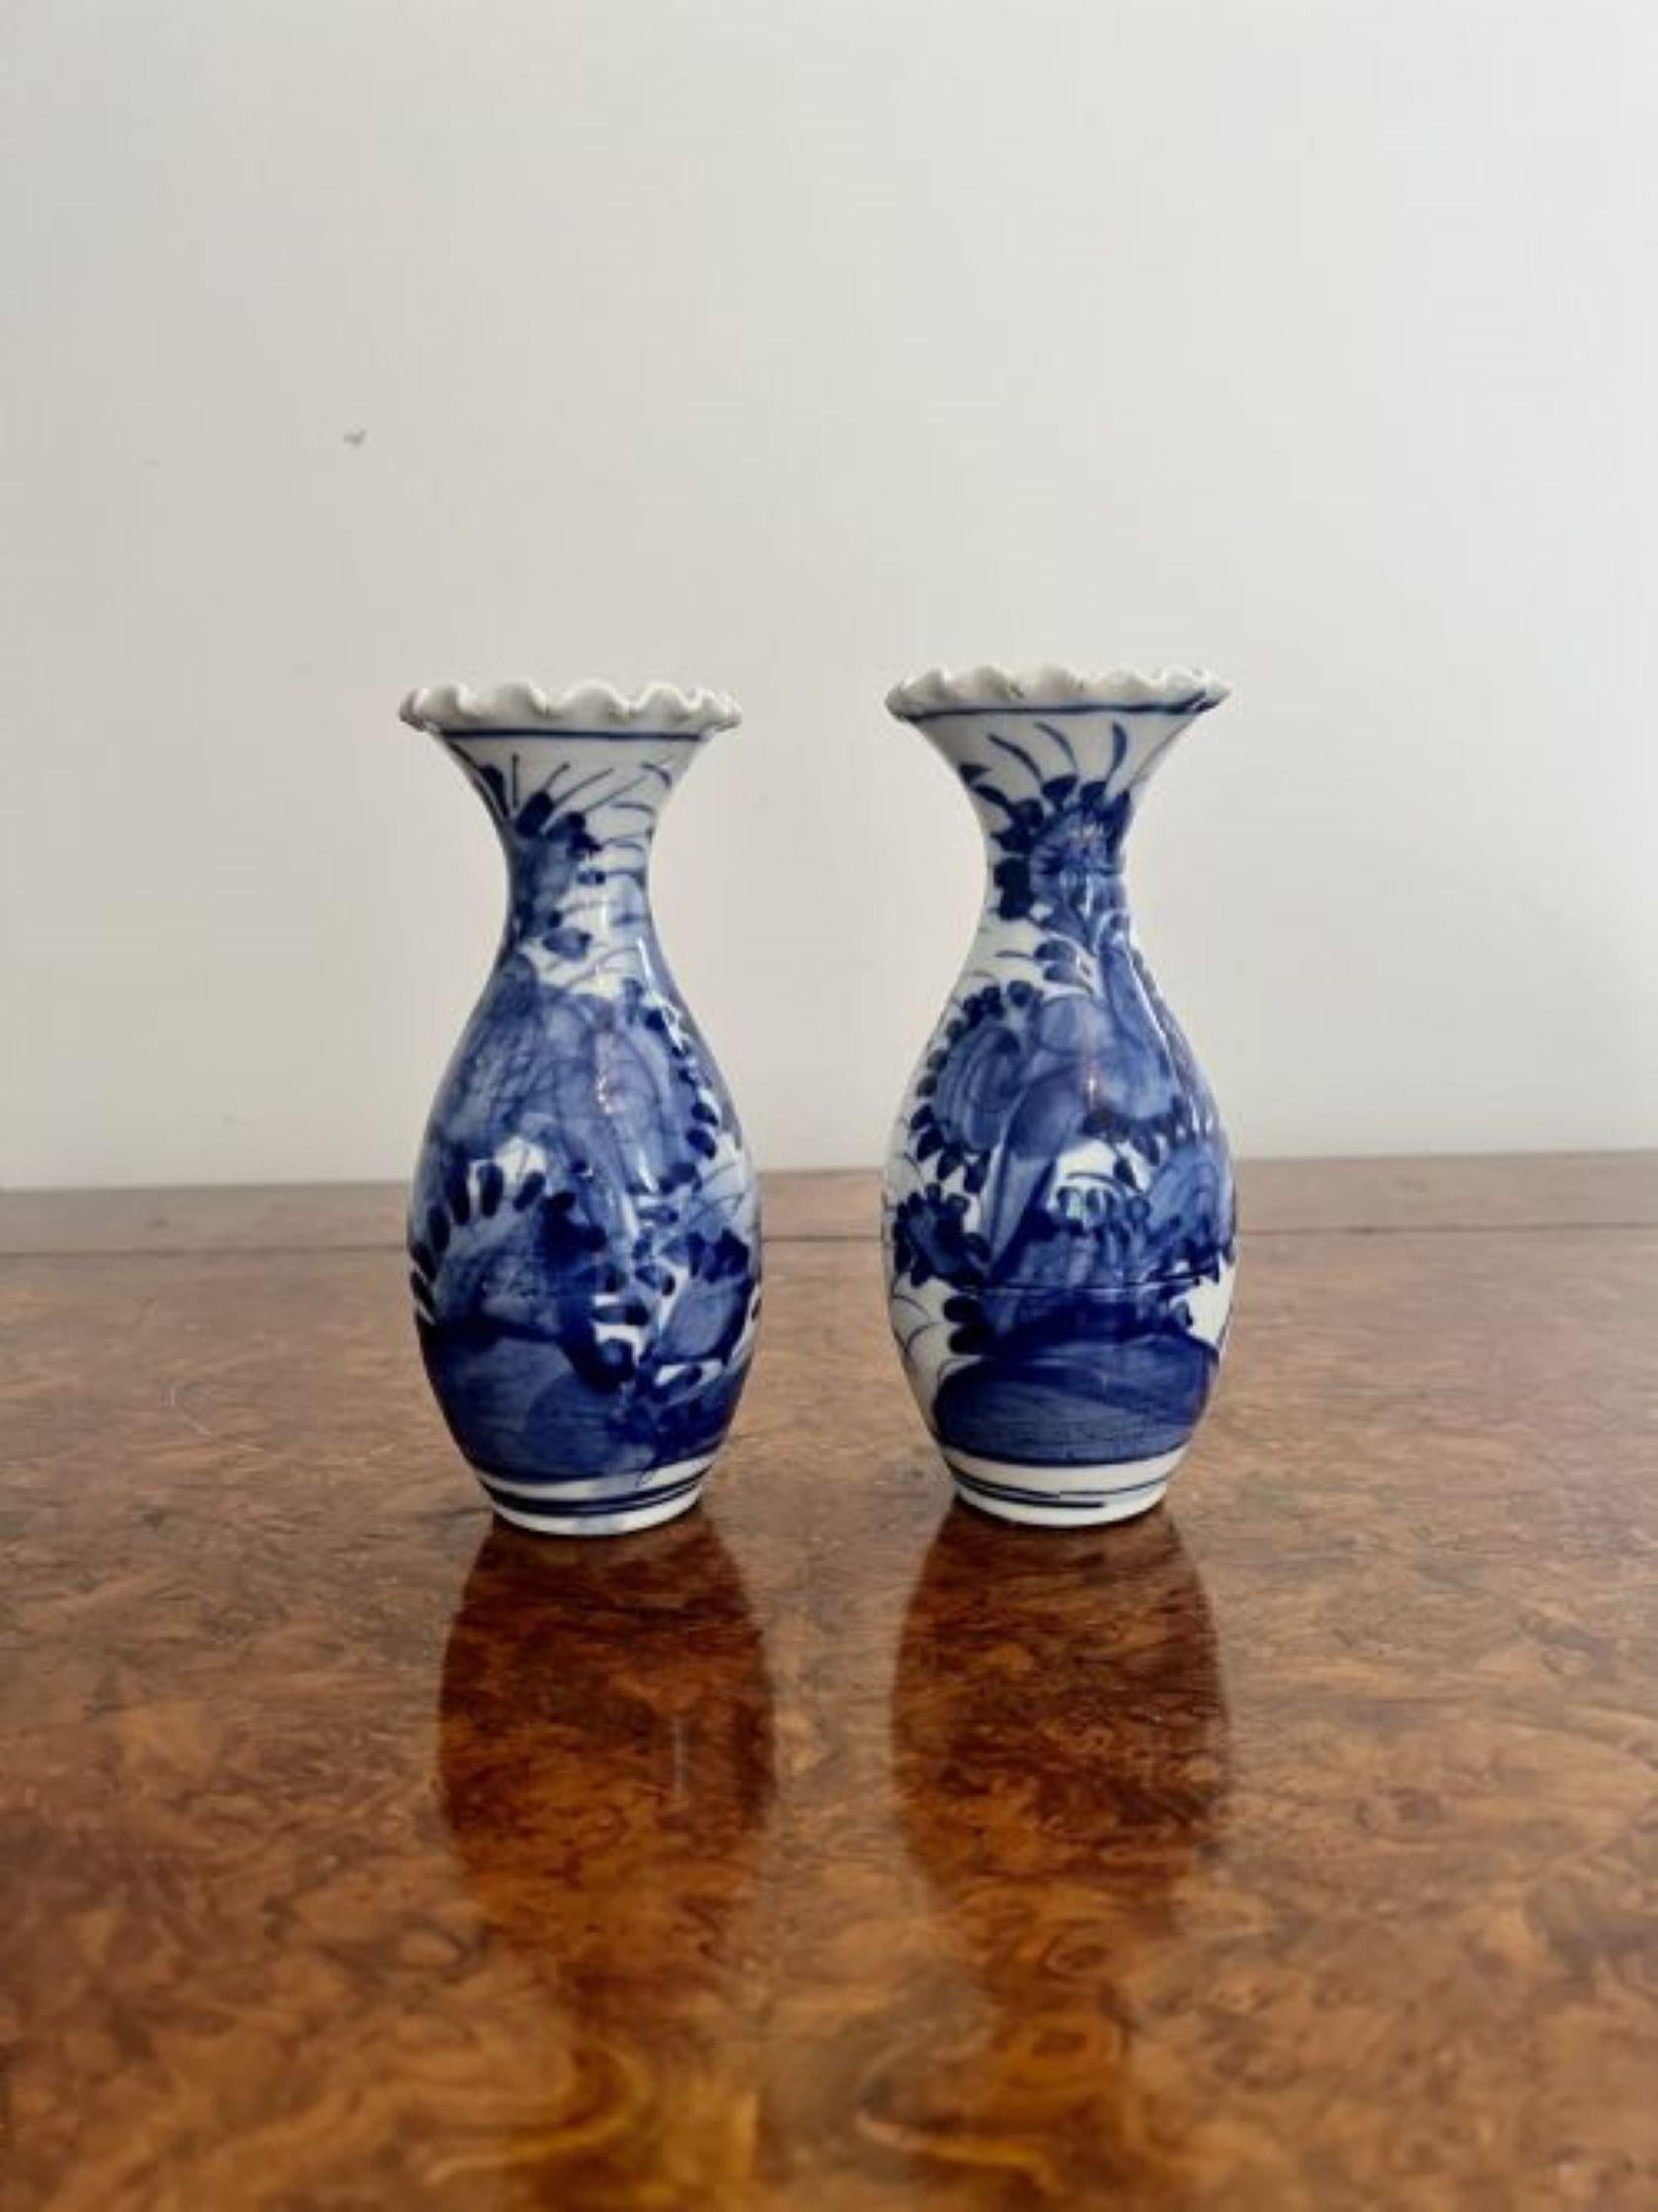 Quality pair of antique Japanese imari blue and white baluster vases having a quality pair of antique Japanese imari blue and white vases hand painted in stunning blue and white colours decorated with flowers, having a fluted wavy rim.